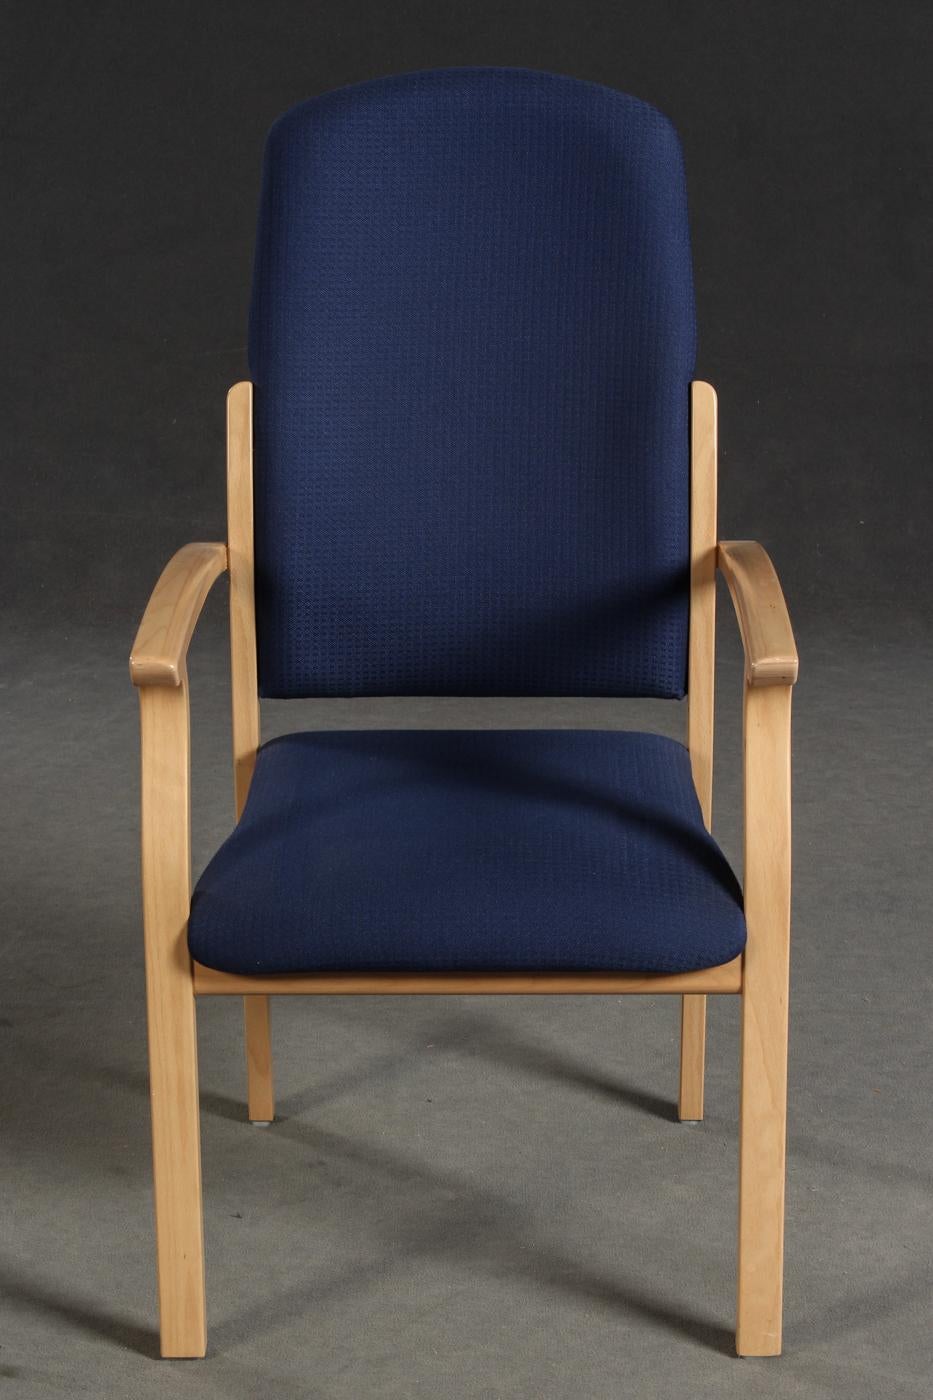 Pair of lounge chair by Brunner for Brunner Werk Design. Model: Opus. Frame of beech plywood. Seat and back upholstered with navy blue fabric cover.